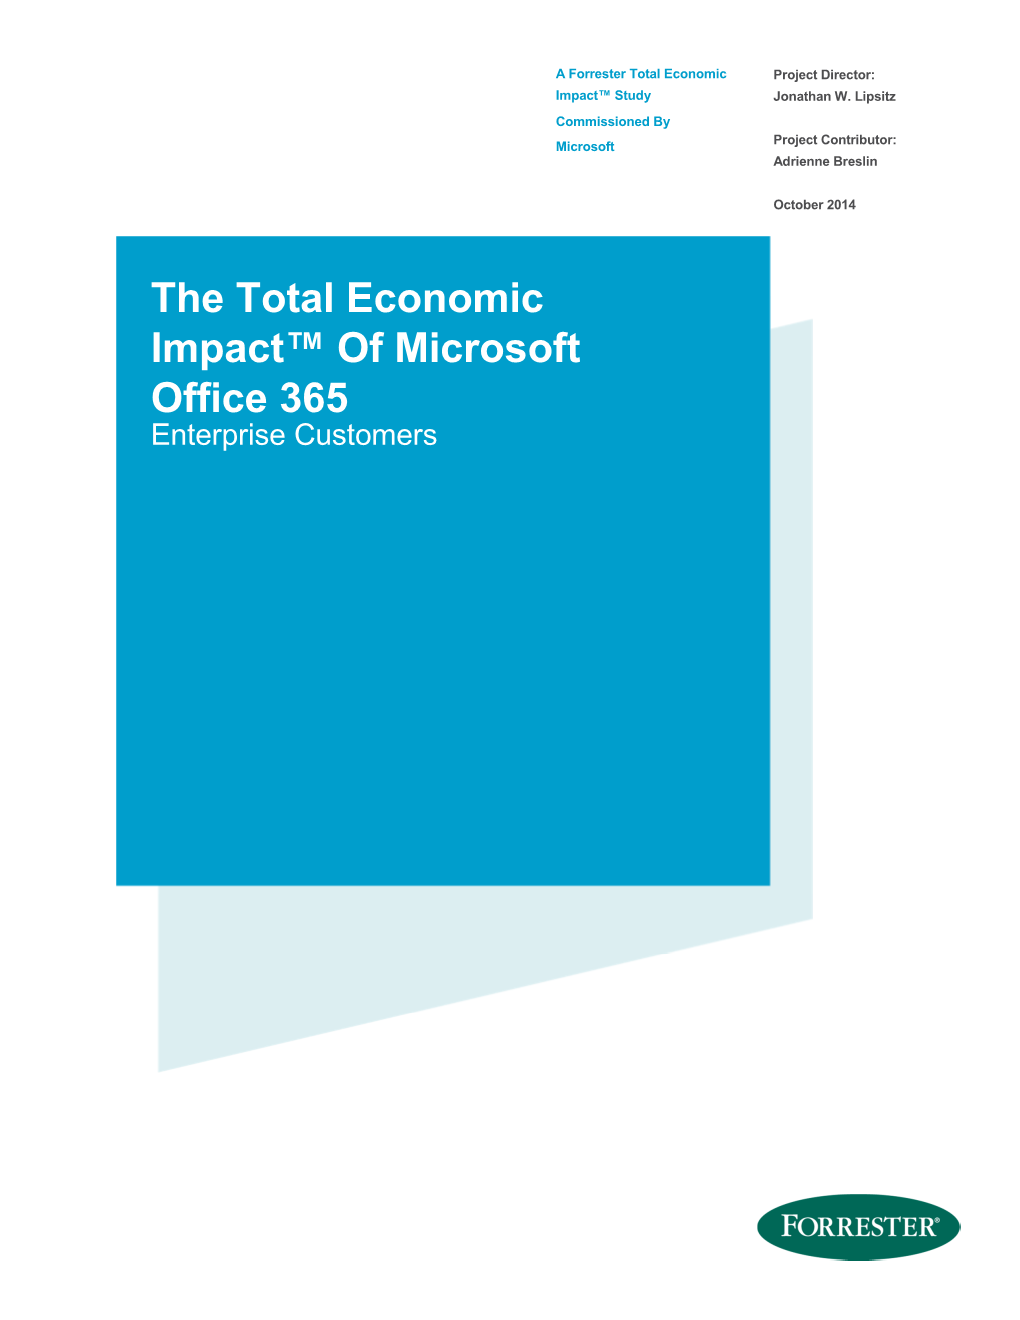 Forrester Total Economic Impact of Microsoft Office